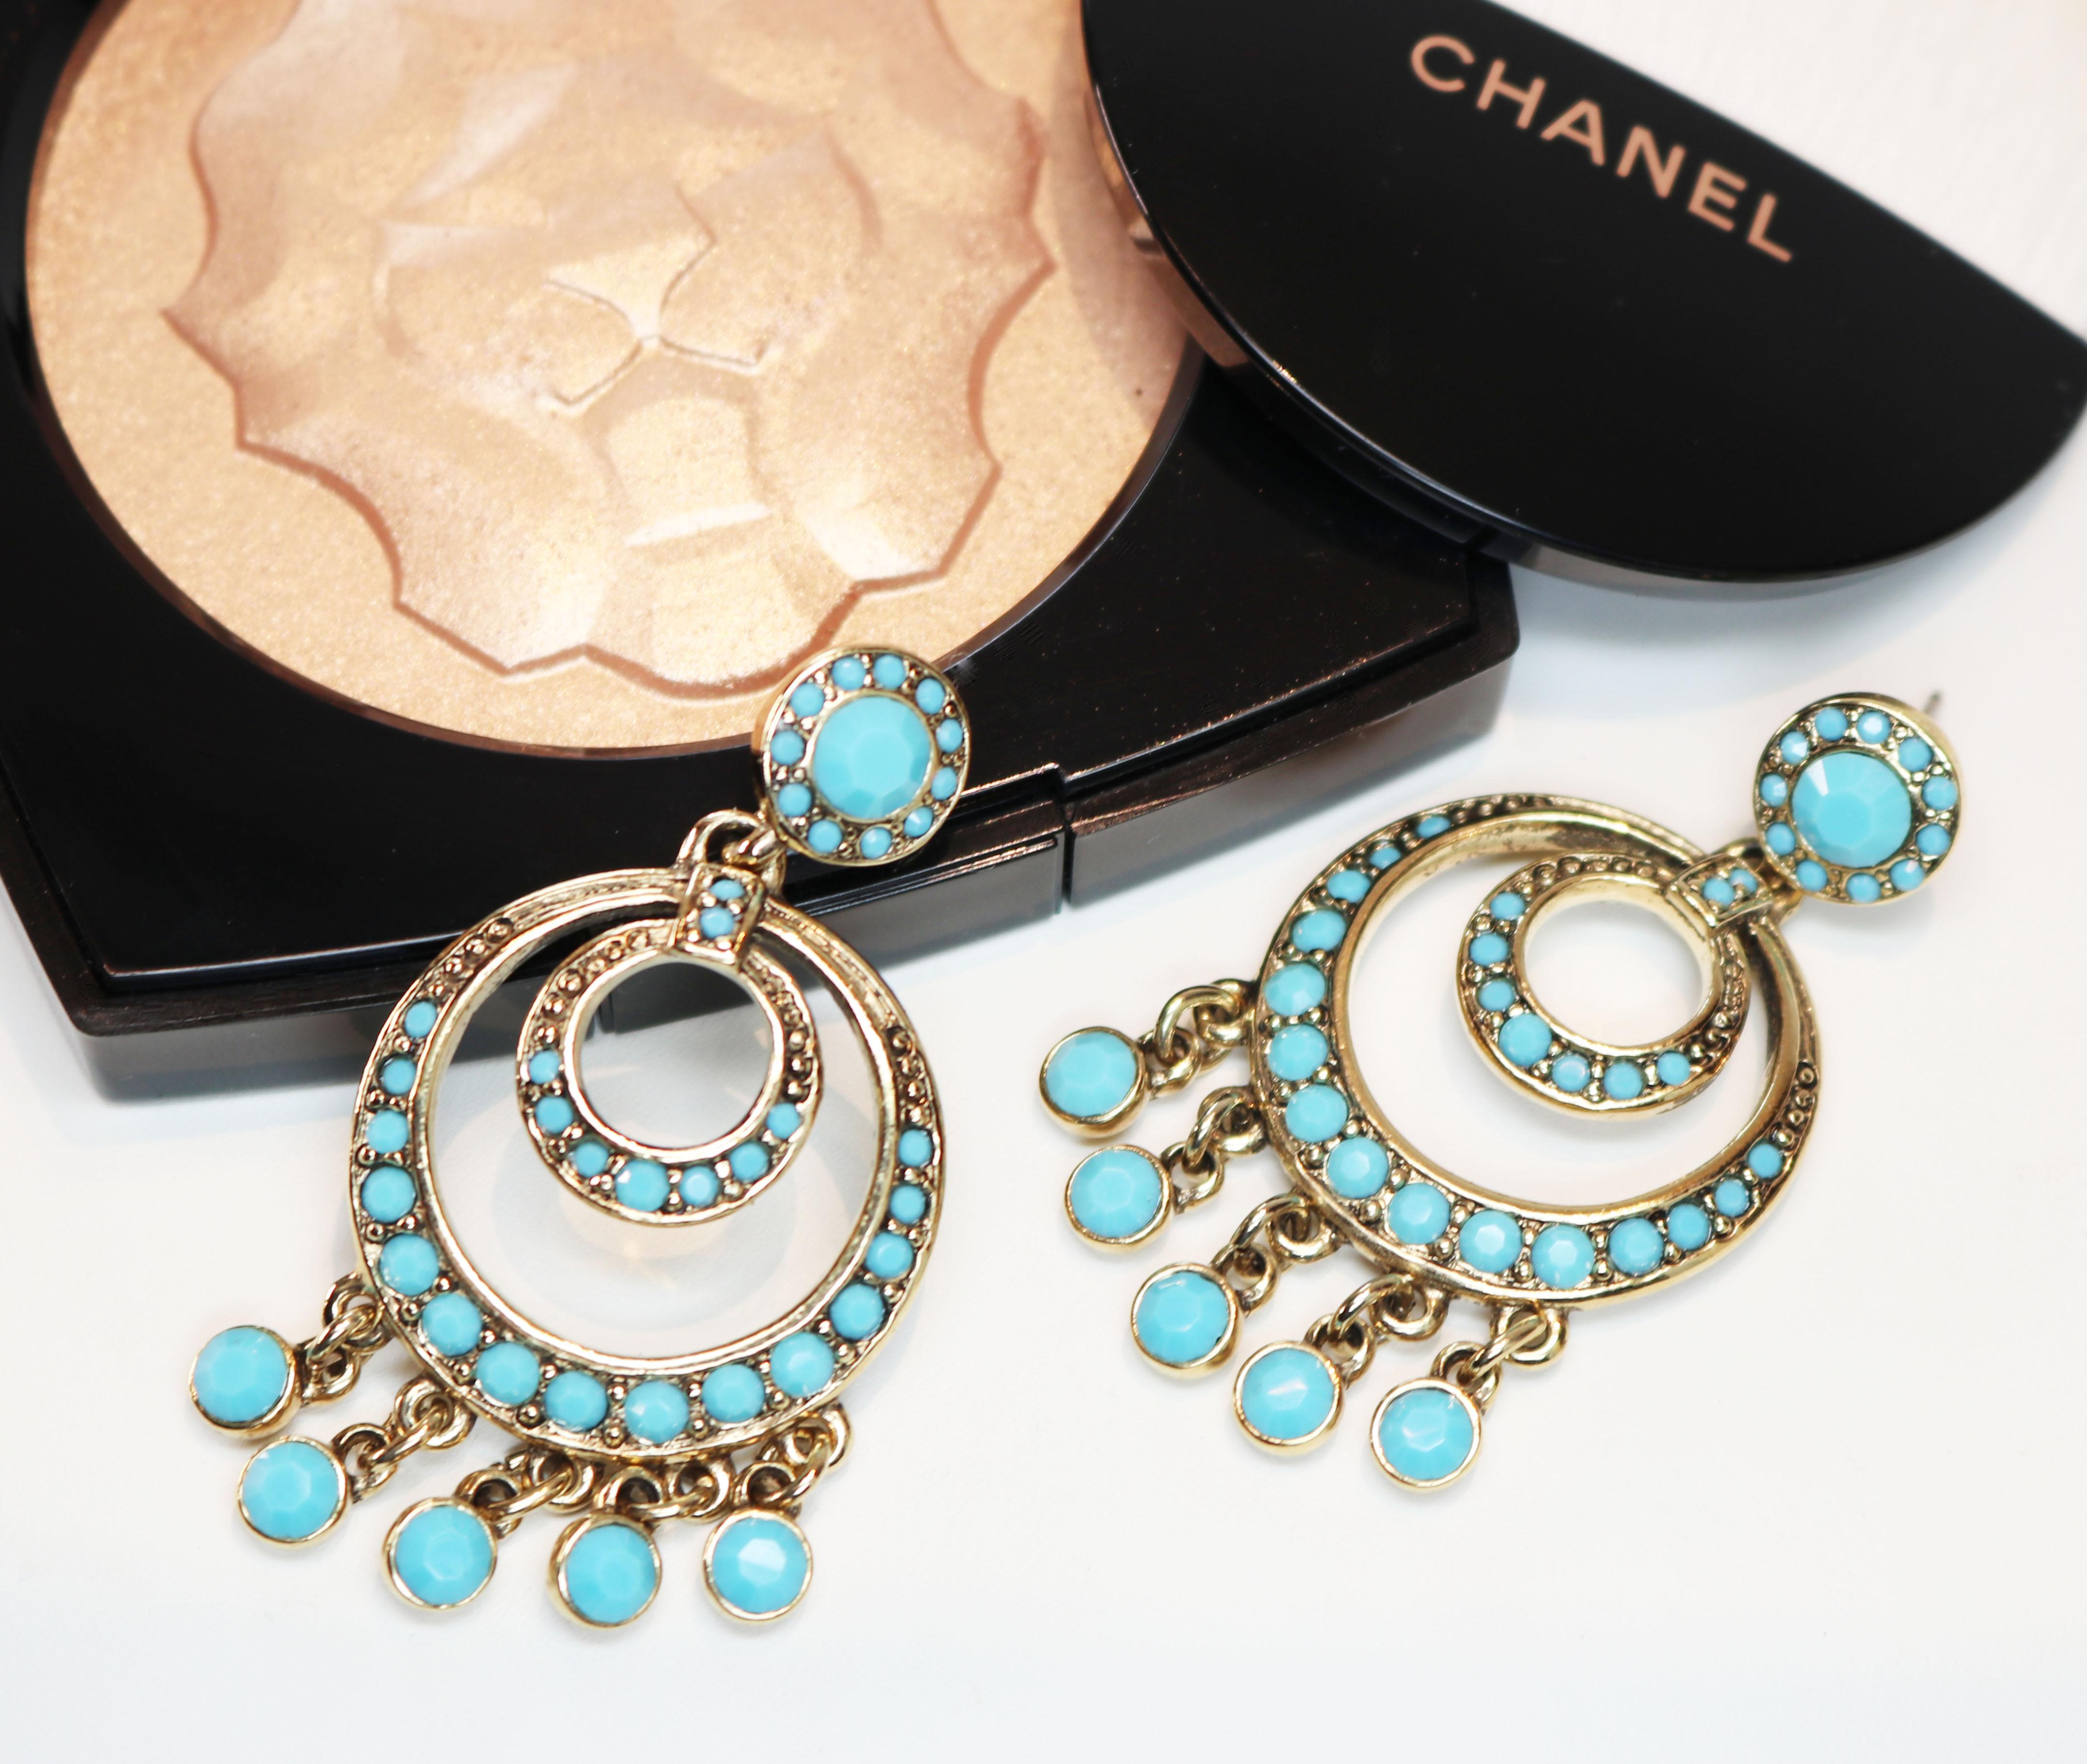 Brand new with original tags Kenneth Jay Lane Simulated Turquoise Encrusted Gold Pierced Earrings - KJL earrings are more popular than ever and these collectible pieces will be instant heirlooms! They are a unique and breathtaking design with five,